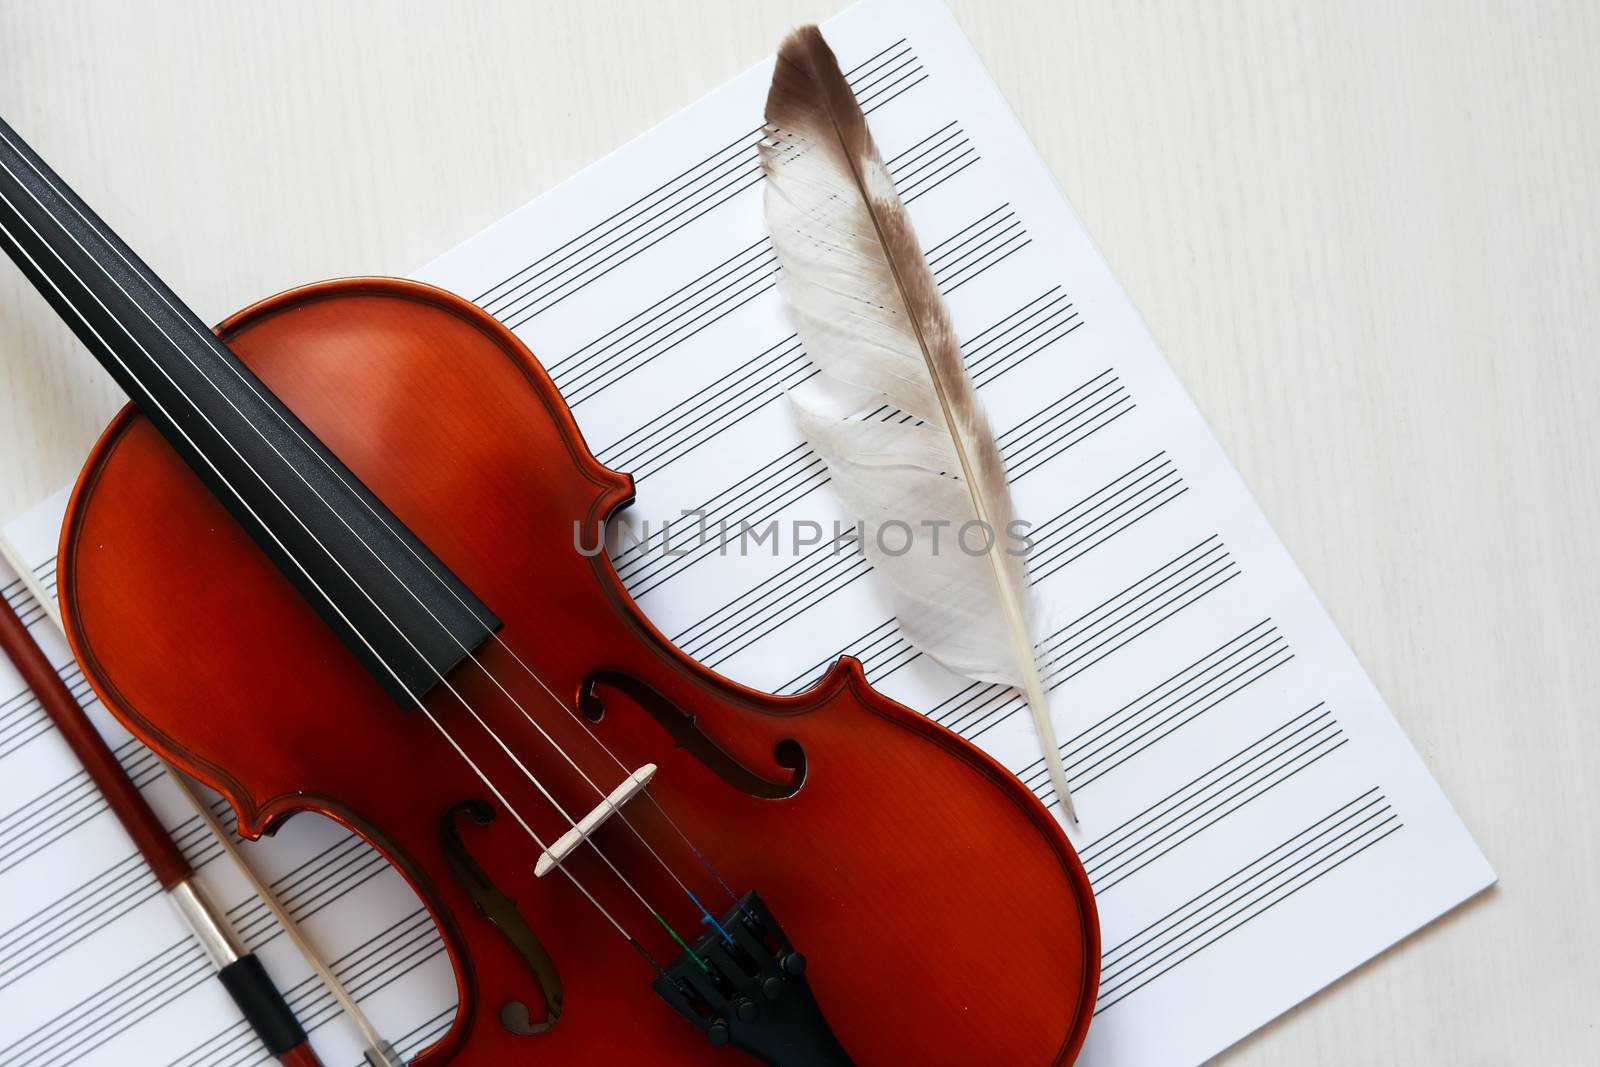 Nice violin and feather on open blank music book